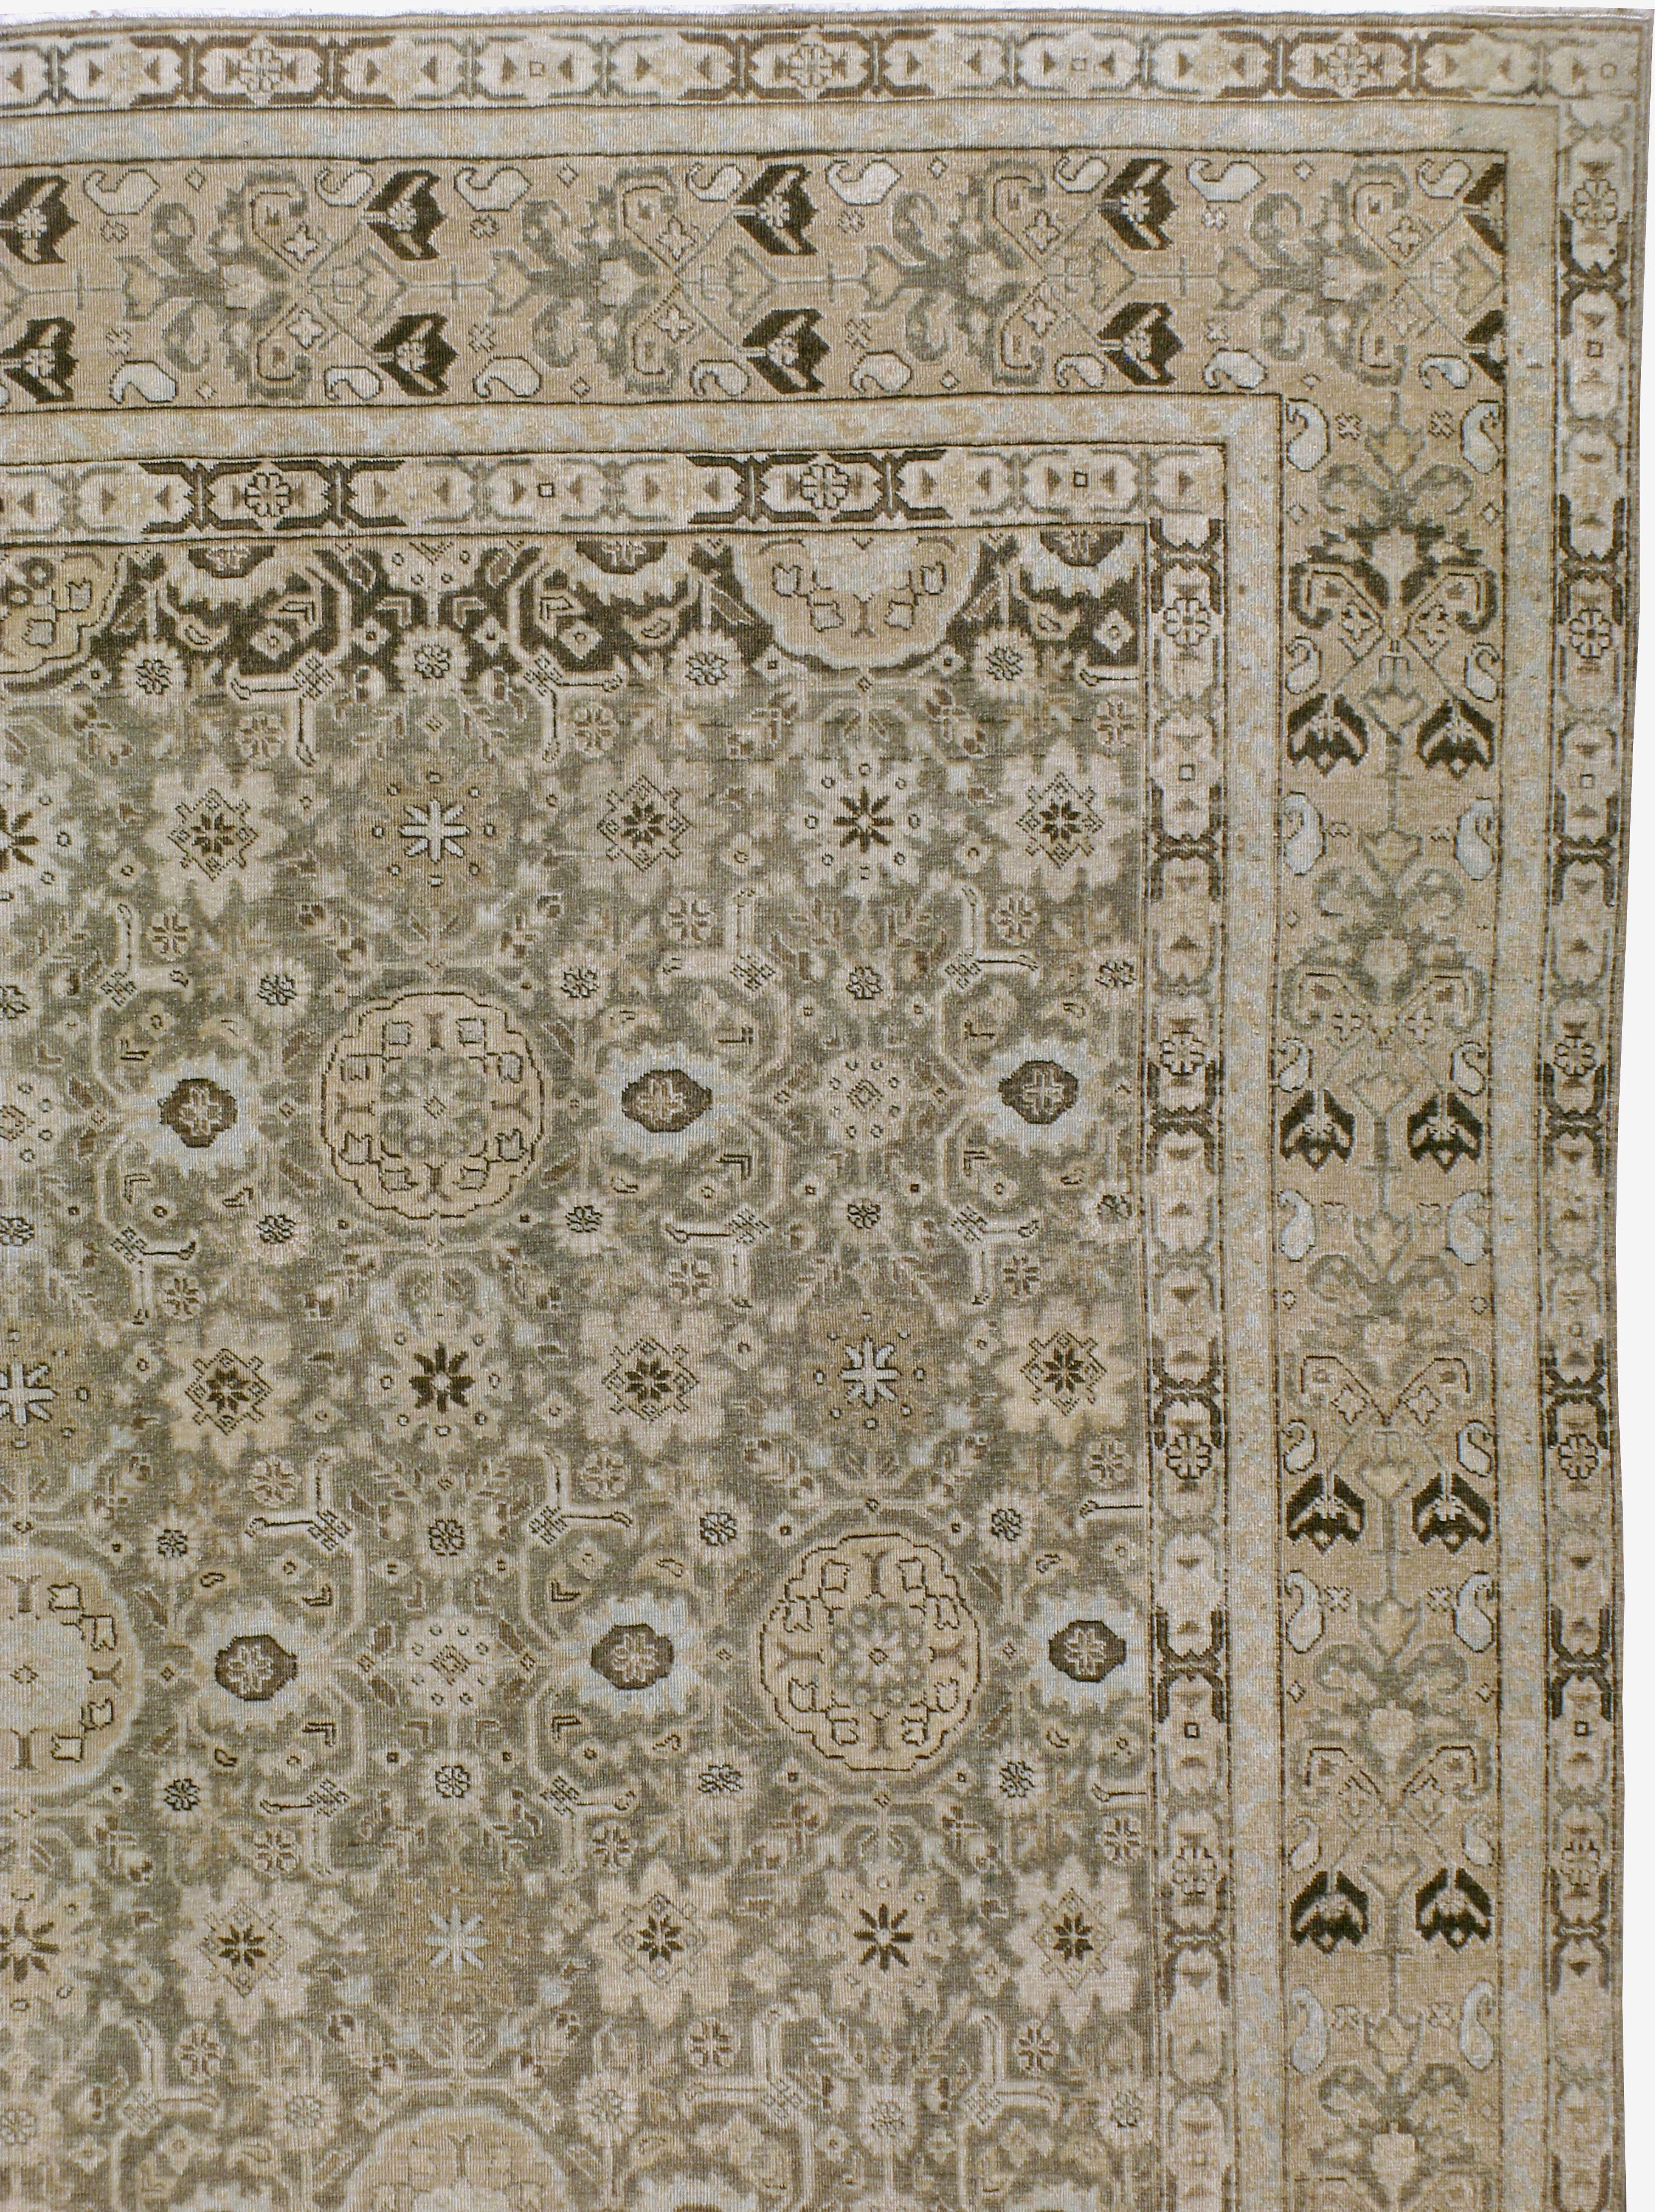 Early 20th Century Handmade Persian Tabriz Room Size Carpet In Neutral Colors In Excellent Condition For Sale In New York, NY